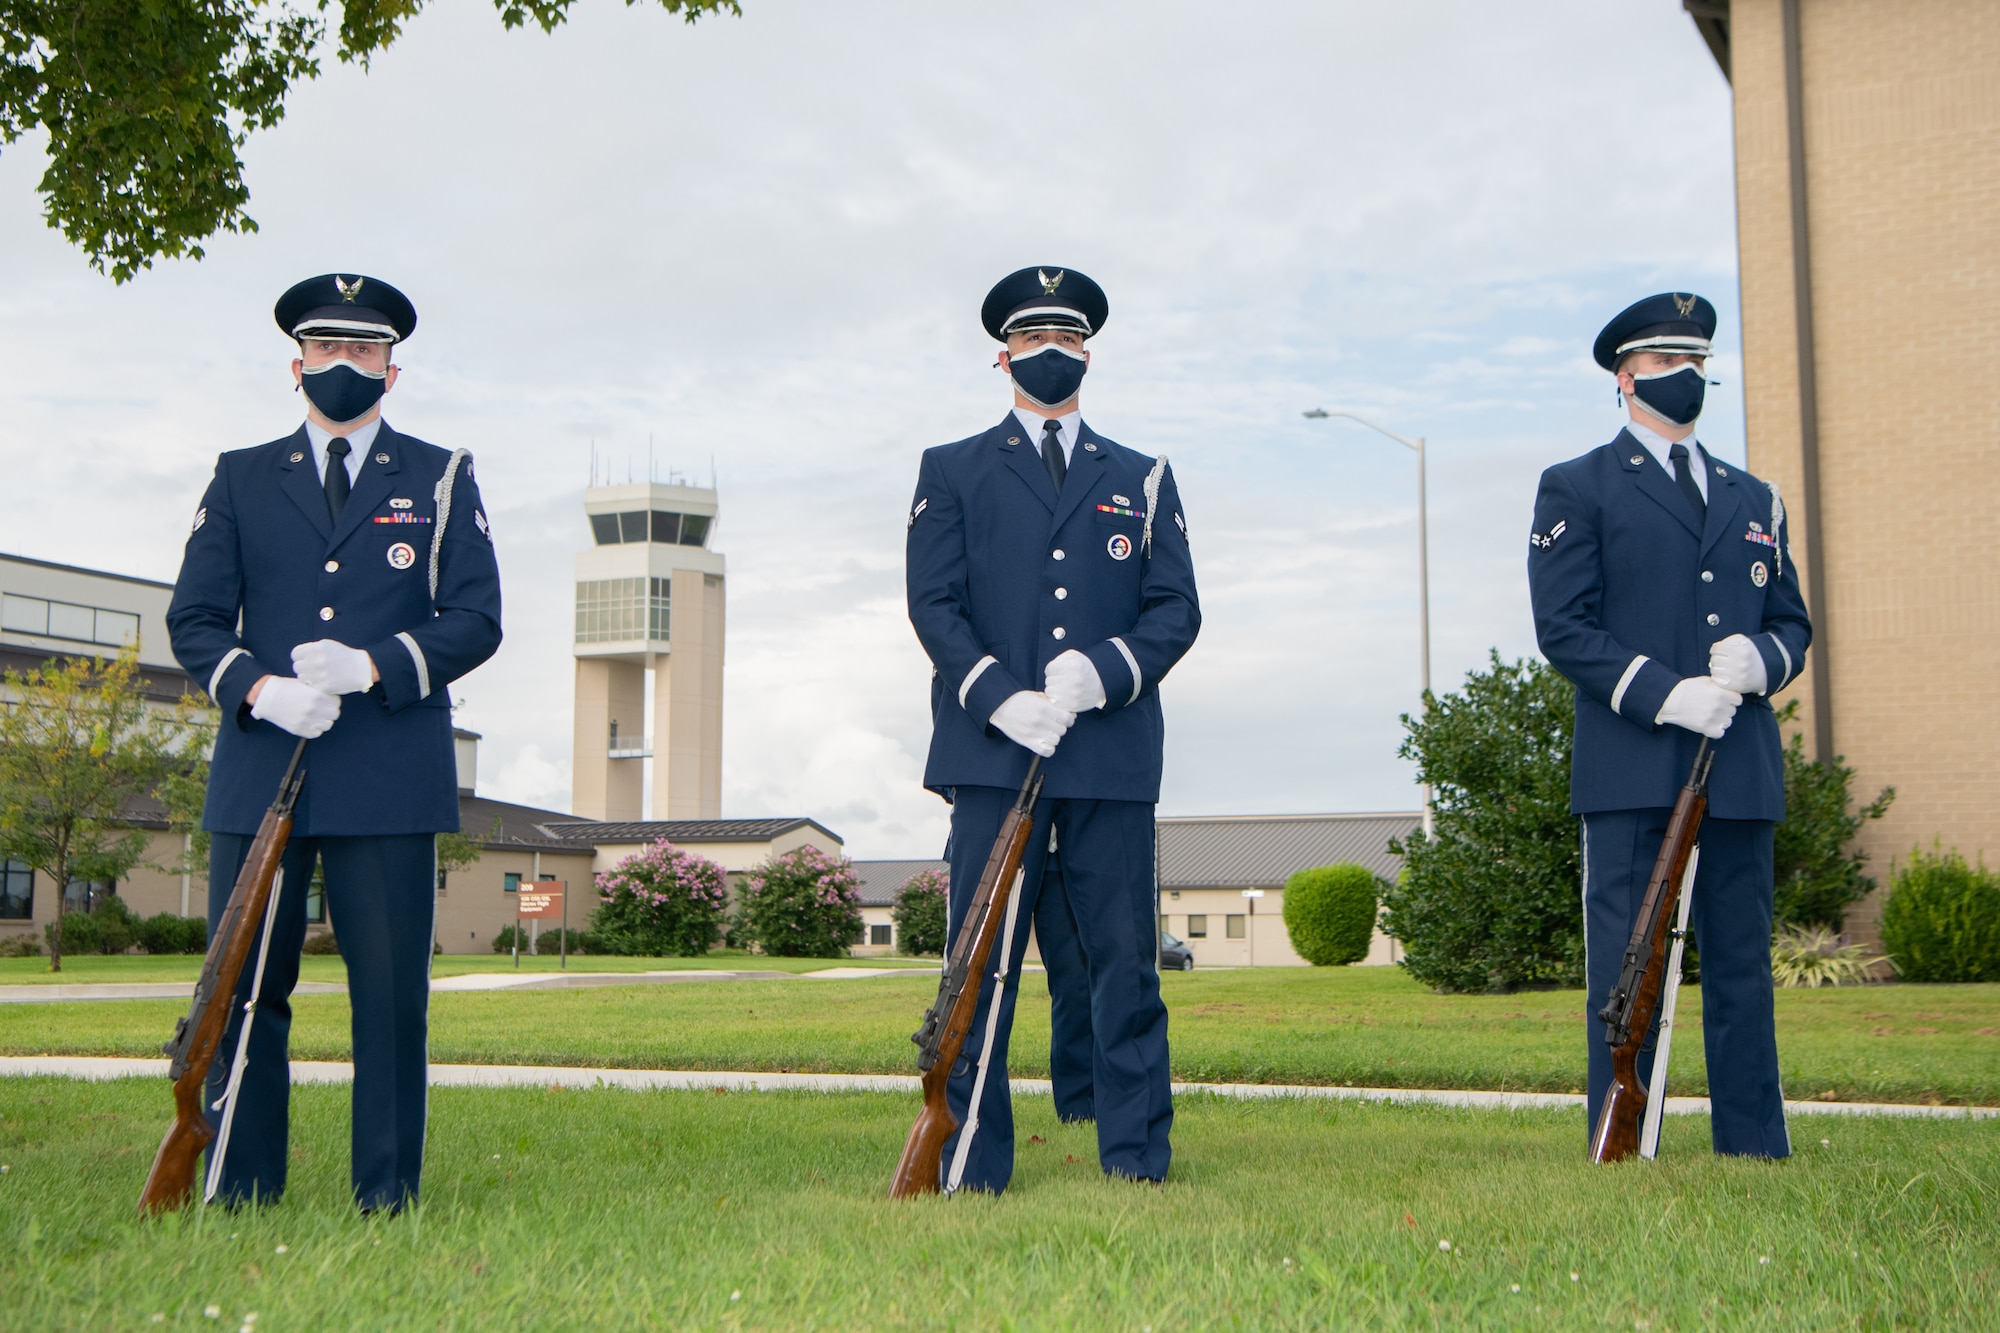 Dover Air Force Base Honor Guard members prepare to fire a volley salute during a retreat ceremony commemorating National POW/MIA Recognition Day on Dover AFB, Delaware, Sept. 17, 2021. The volley is an old battleground tradition, in which the two warring sides would cease hostilities to clear their dead from the battlefield. (U.S. Air Force photo by Mauricio Campino)